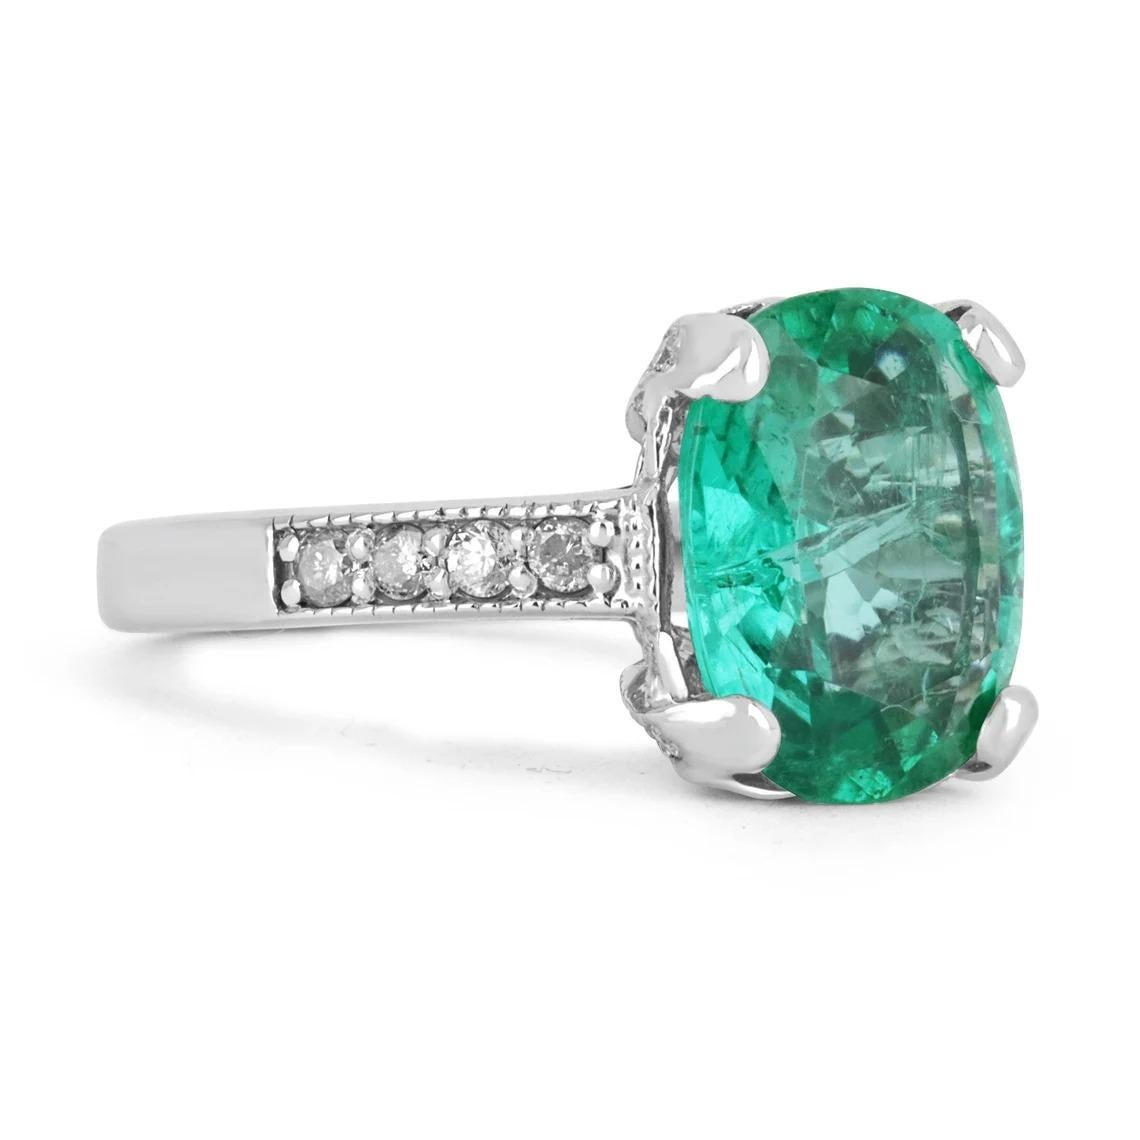 Featured here is a stunning emerald and diamond engagement/anniversary ring. The center stone holds 5.12-carats of pure natural beauty. The stone displays a lovely shine and green color, as well as very good eye clarity. Accented on both sides are